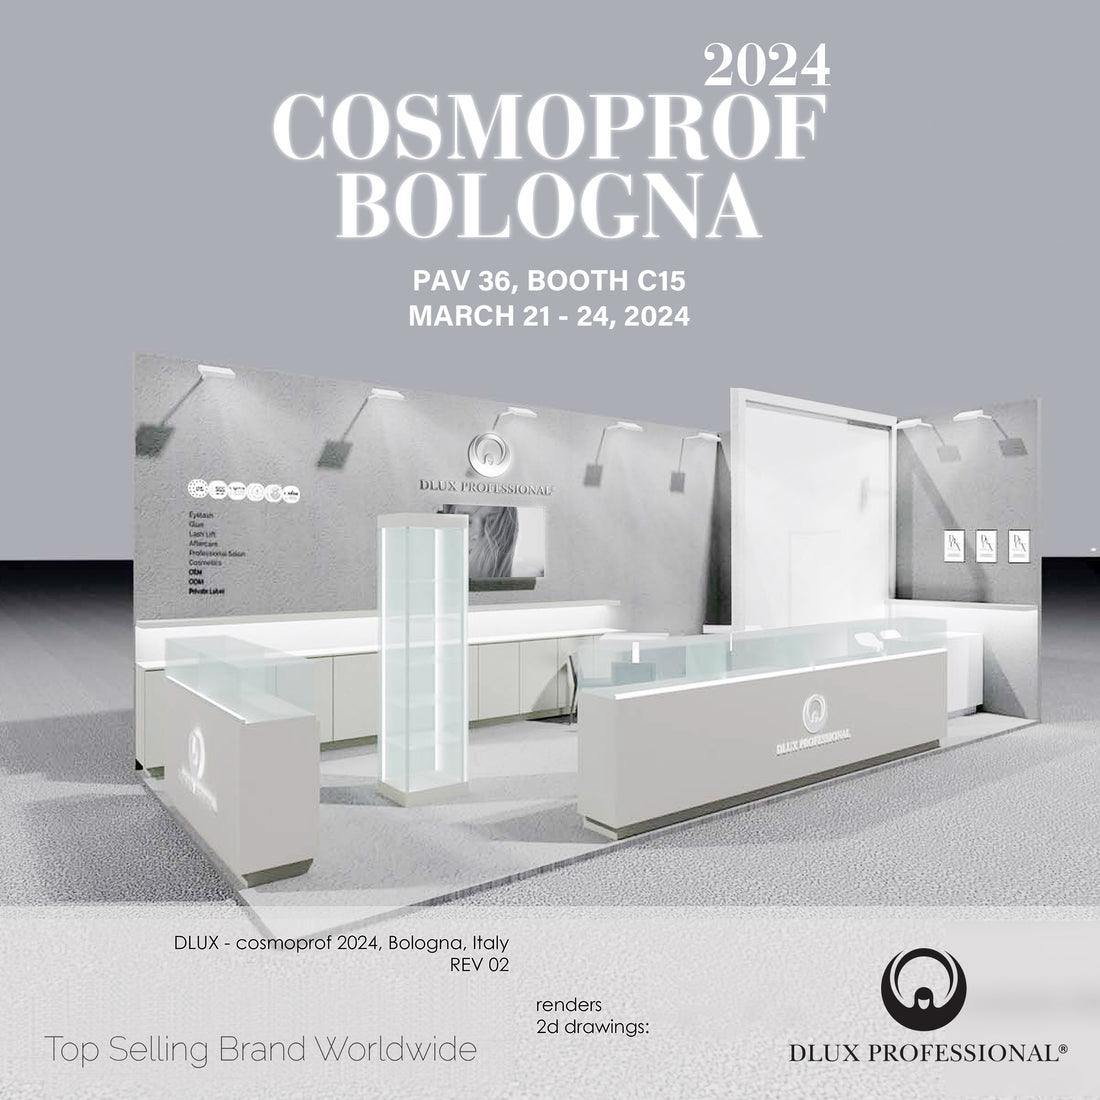 COSMOPROF Bologna 2024 Your Lash Haven at Pav 36, Booth C15!